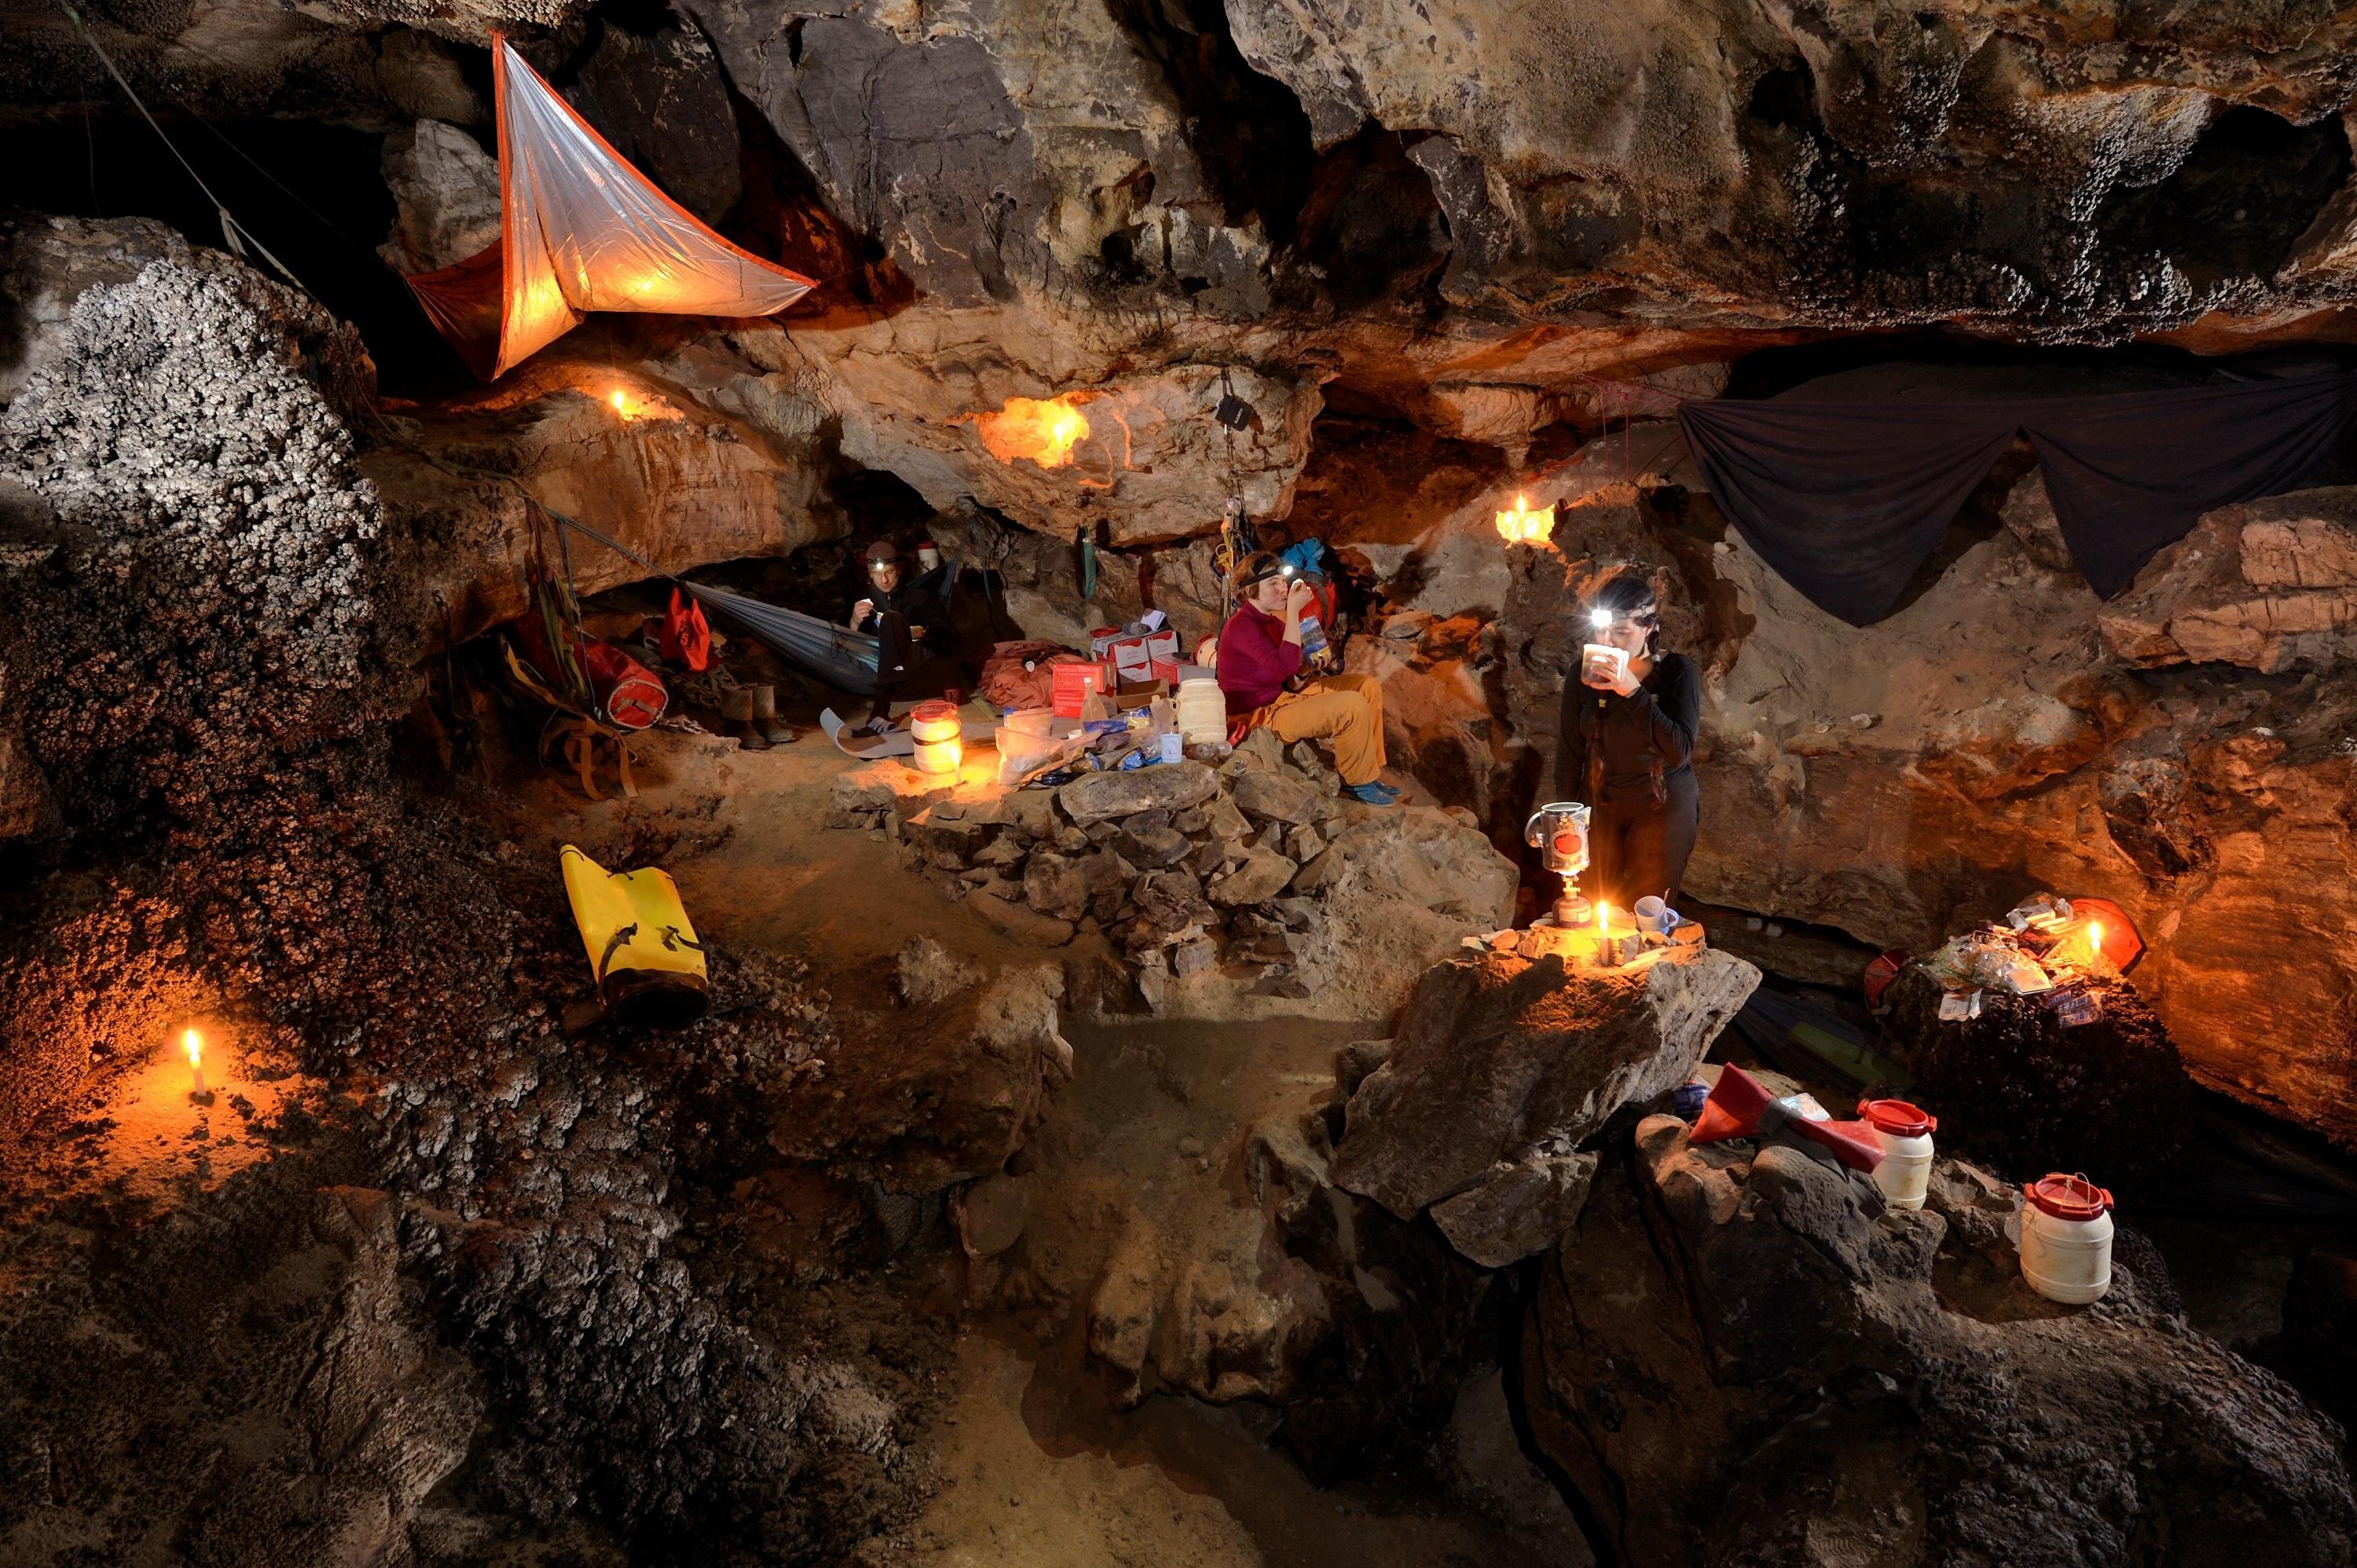 The underground camp in Sang Wang Dong is a cosy and warm place to stay. Hot food and drink recharge weary and tired explorers before taking a few hours sleep in either suspended hammocks or on roll mats on the floor